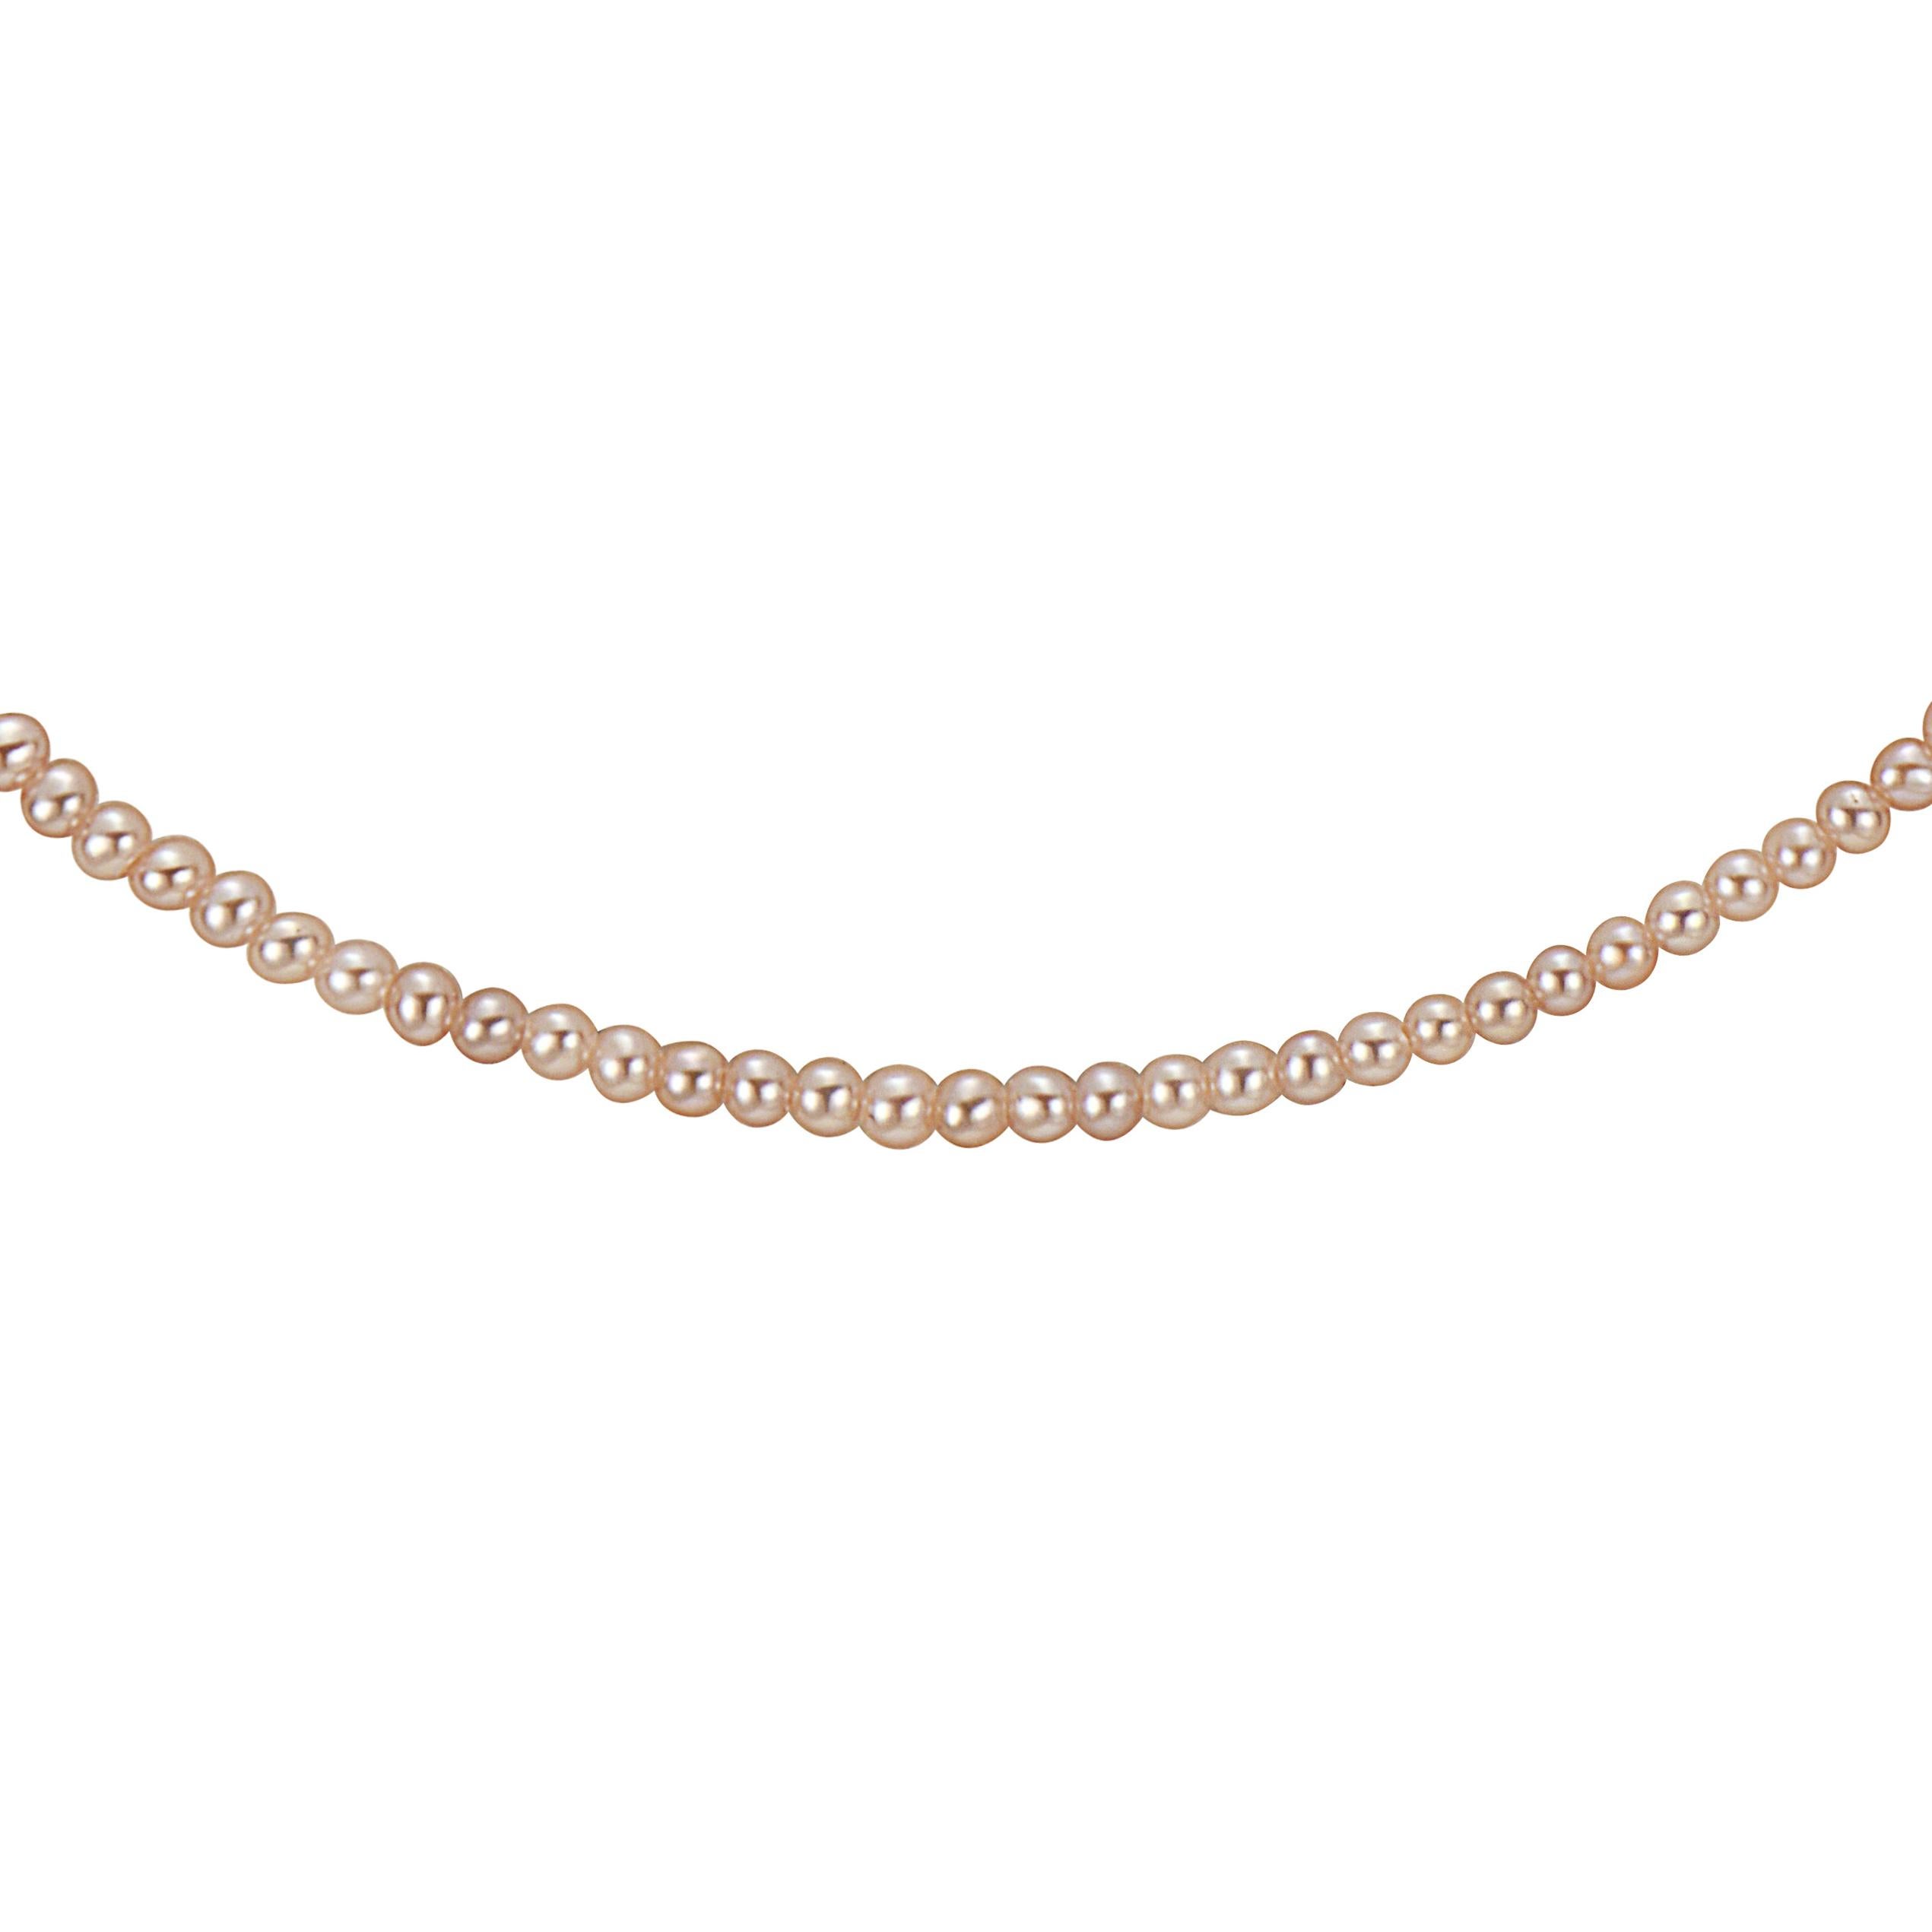 This natural pink color Chinese Freshwater cultured pearl necklace features fine quality, high luster 3-3.5mm pearls. The necklace is strung to 18